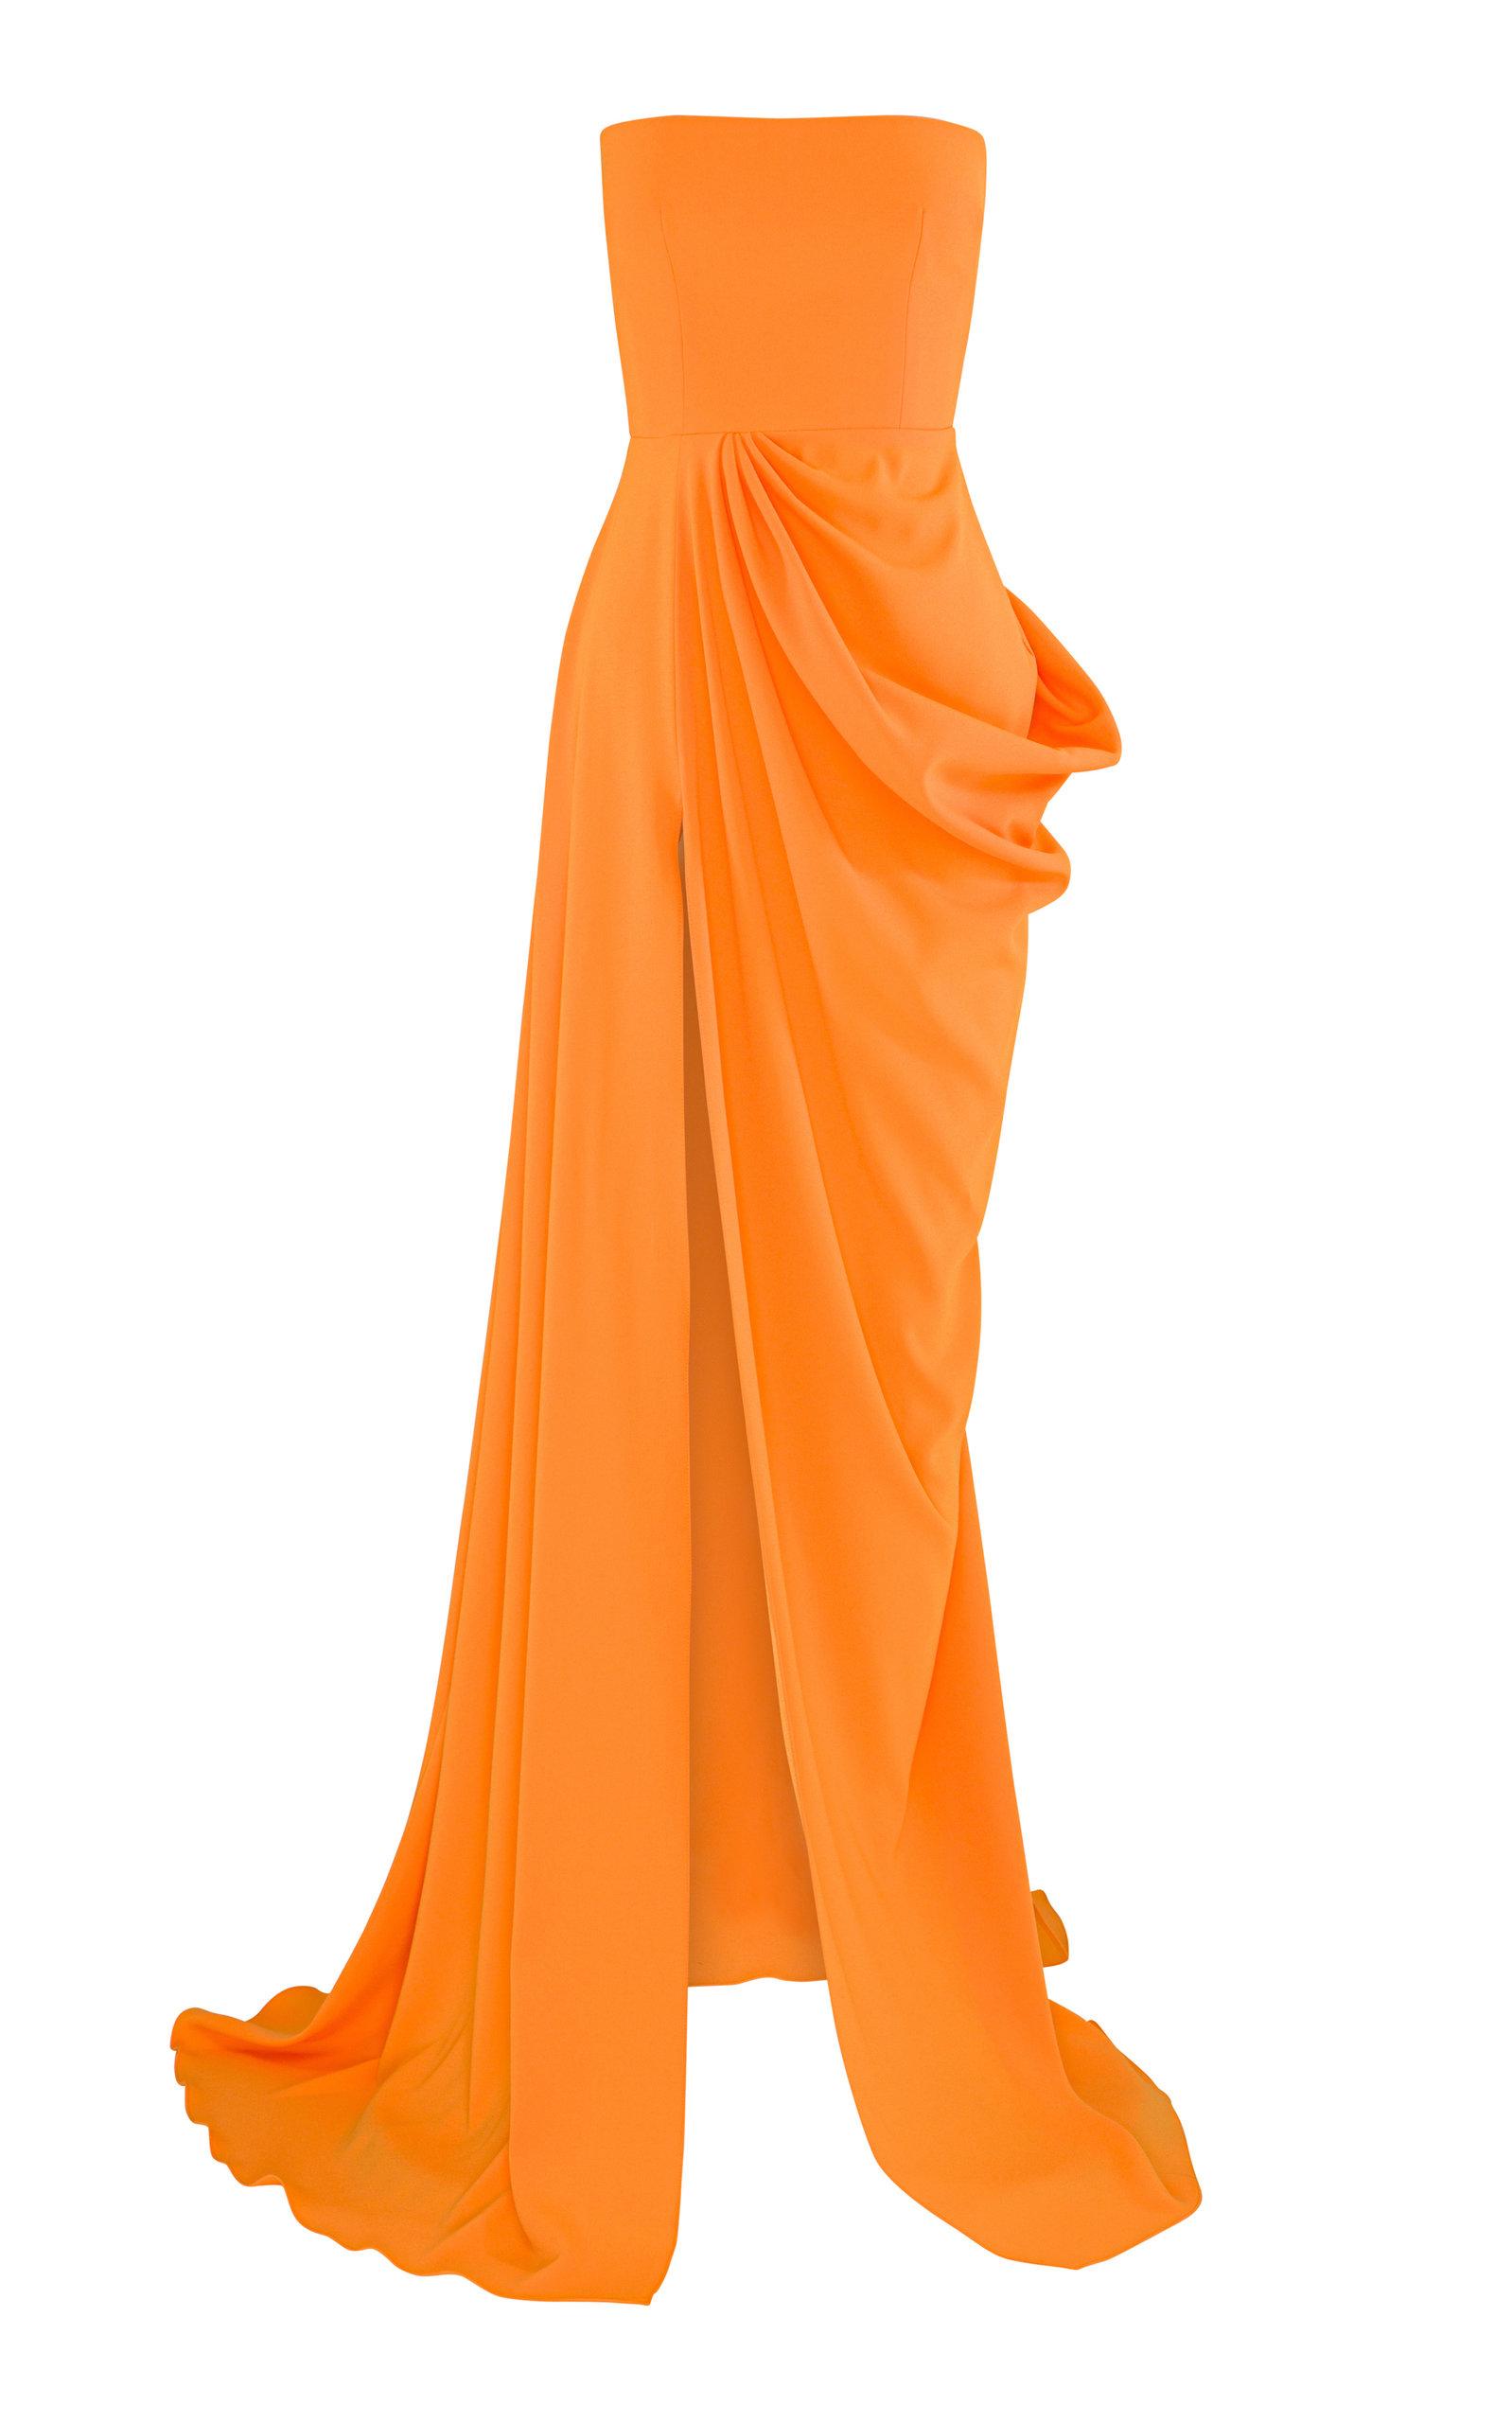 Alex Perry Reed Draped Crepe Gown in Orange | Lyst